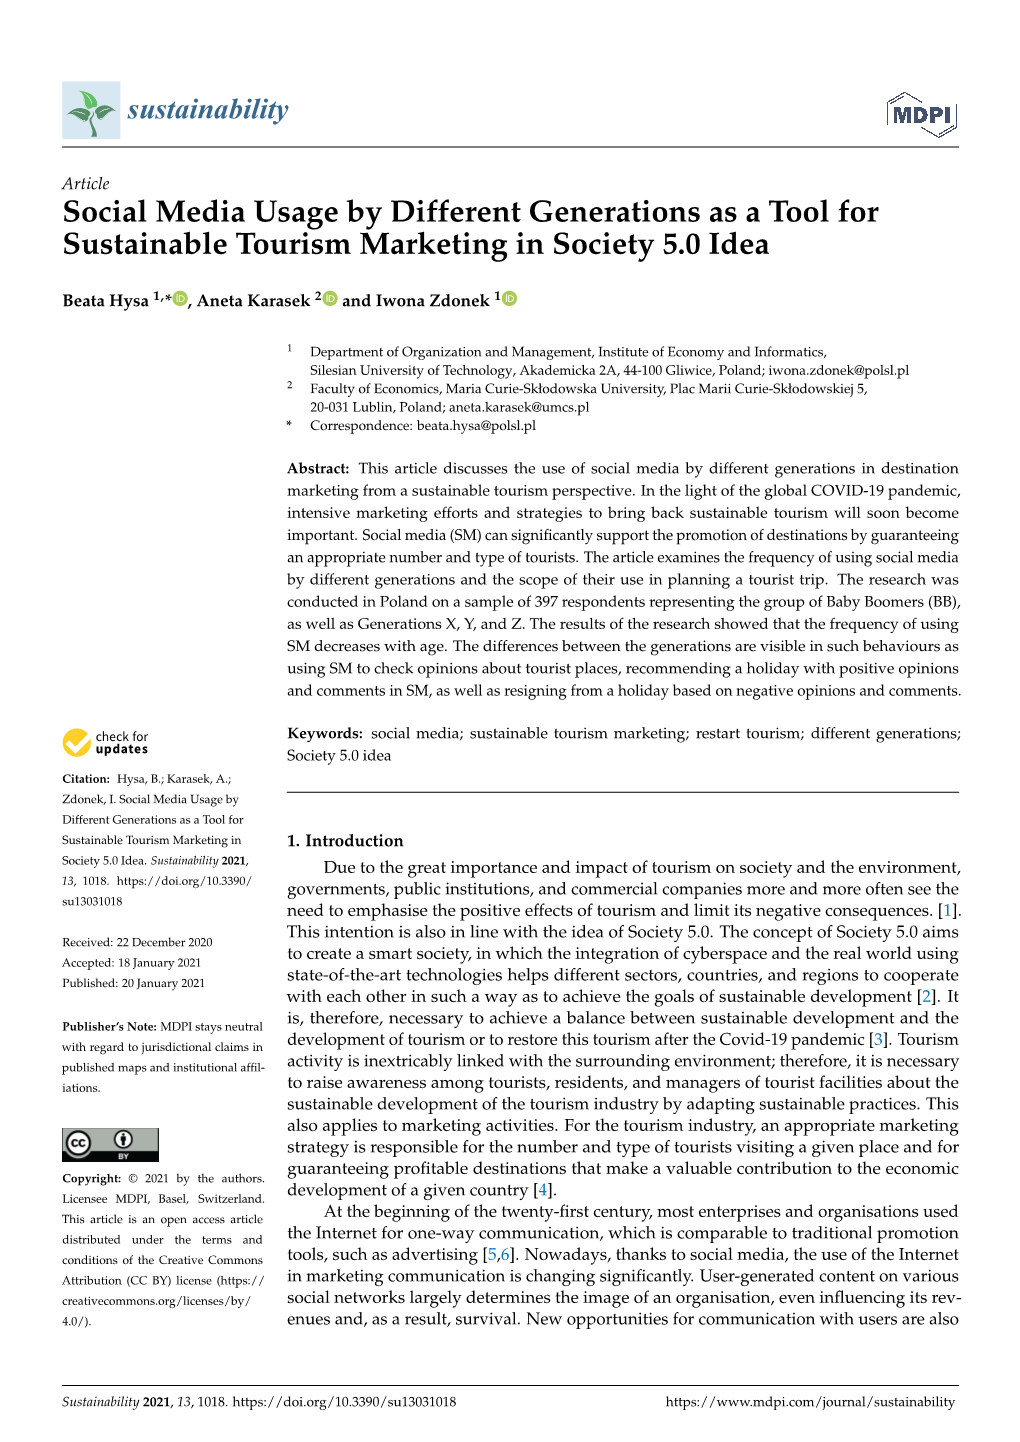 Social Media Usage by Different Generations As a Tool for Sustainable Tourism Marketing in Society 5.0 Idea